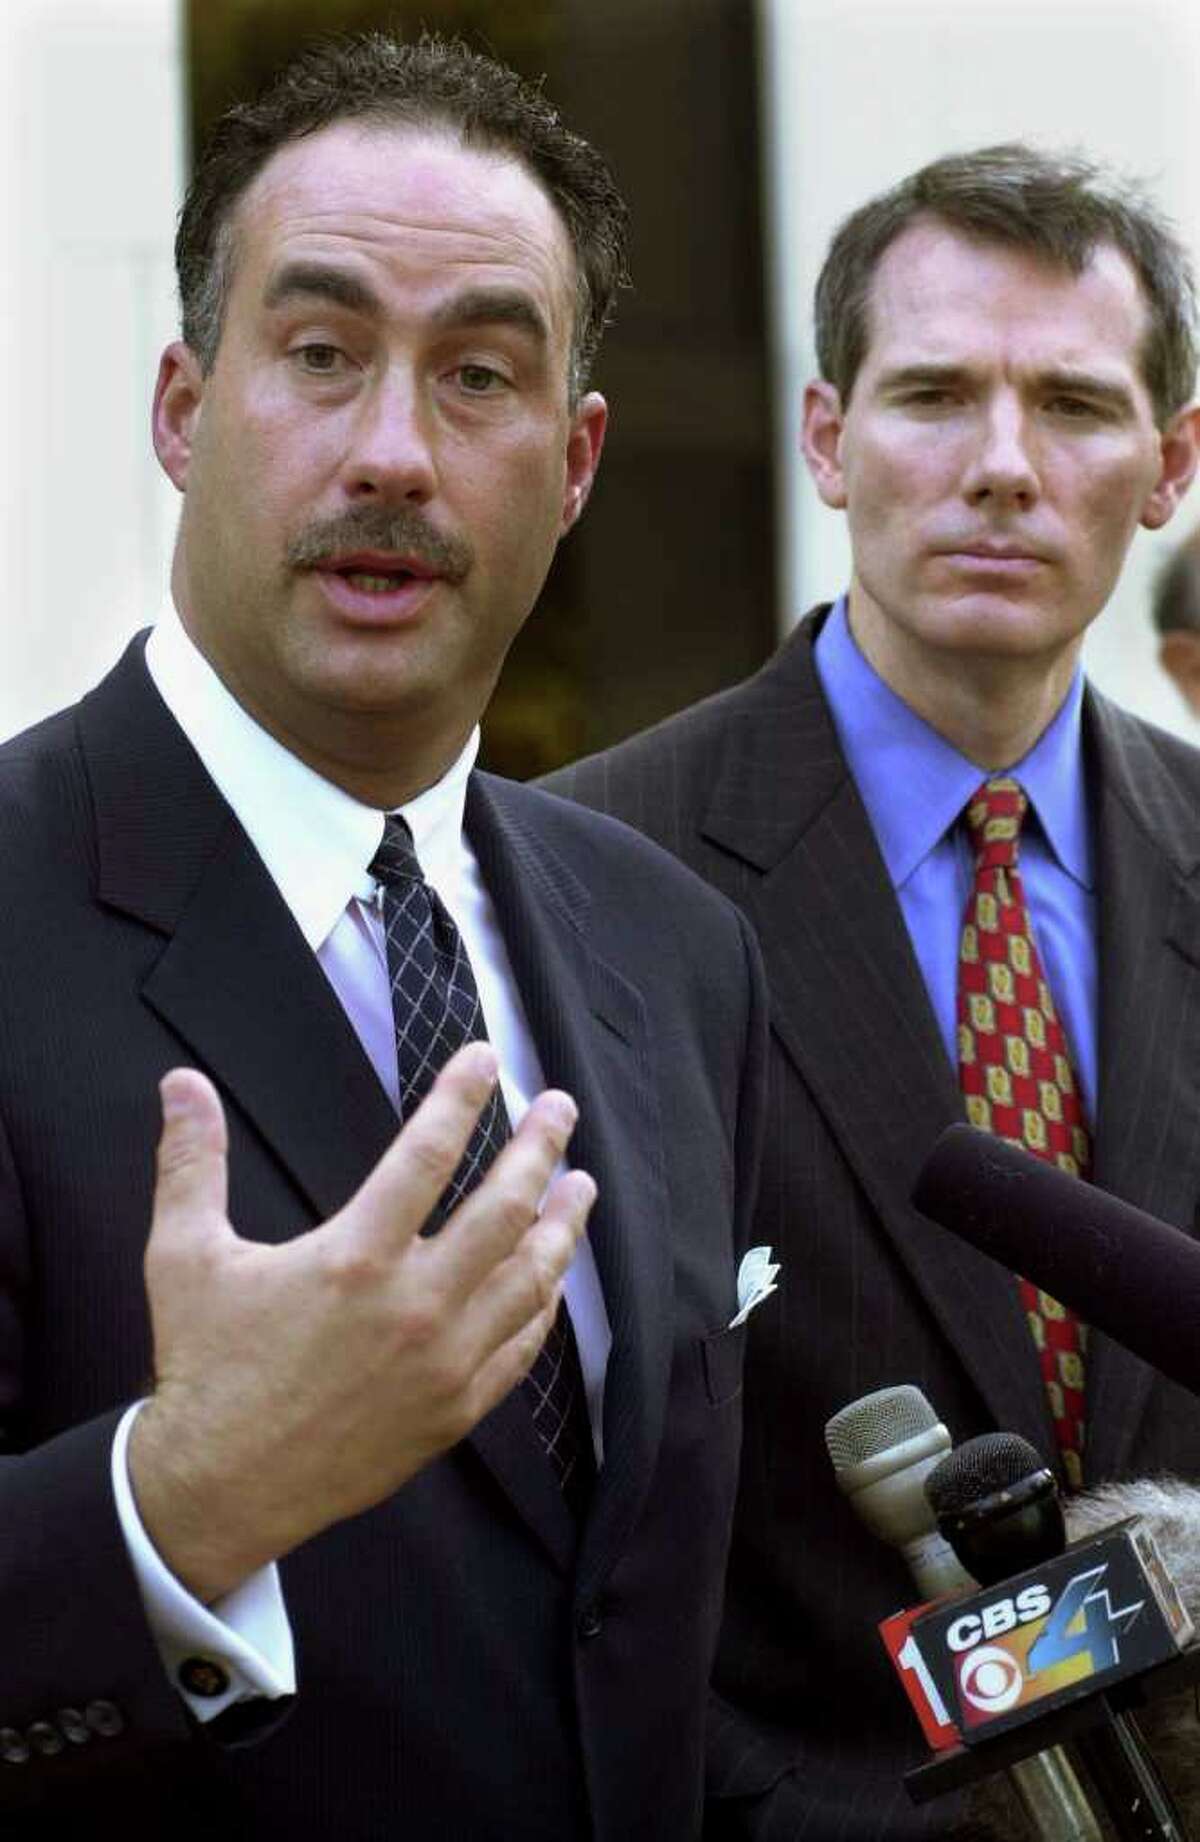 Former U.S. Rep. John Sweeney, R-Clifton Park, speaks at a news conference in Miami Nov. 19, 2000, as Rep. Rob Portman, R-Ohio, looks on at right. The two were commenting on the vote recount going on in Miami-Dade County. Sweeney later became a target of a Justice Department investigation related to his congressional duties and ties to an Albany lobbyist, William D. Powers. (AP Photo/Marta Lavandier)